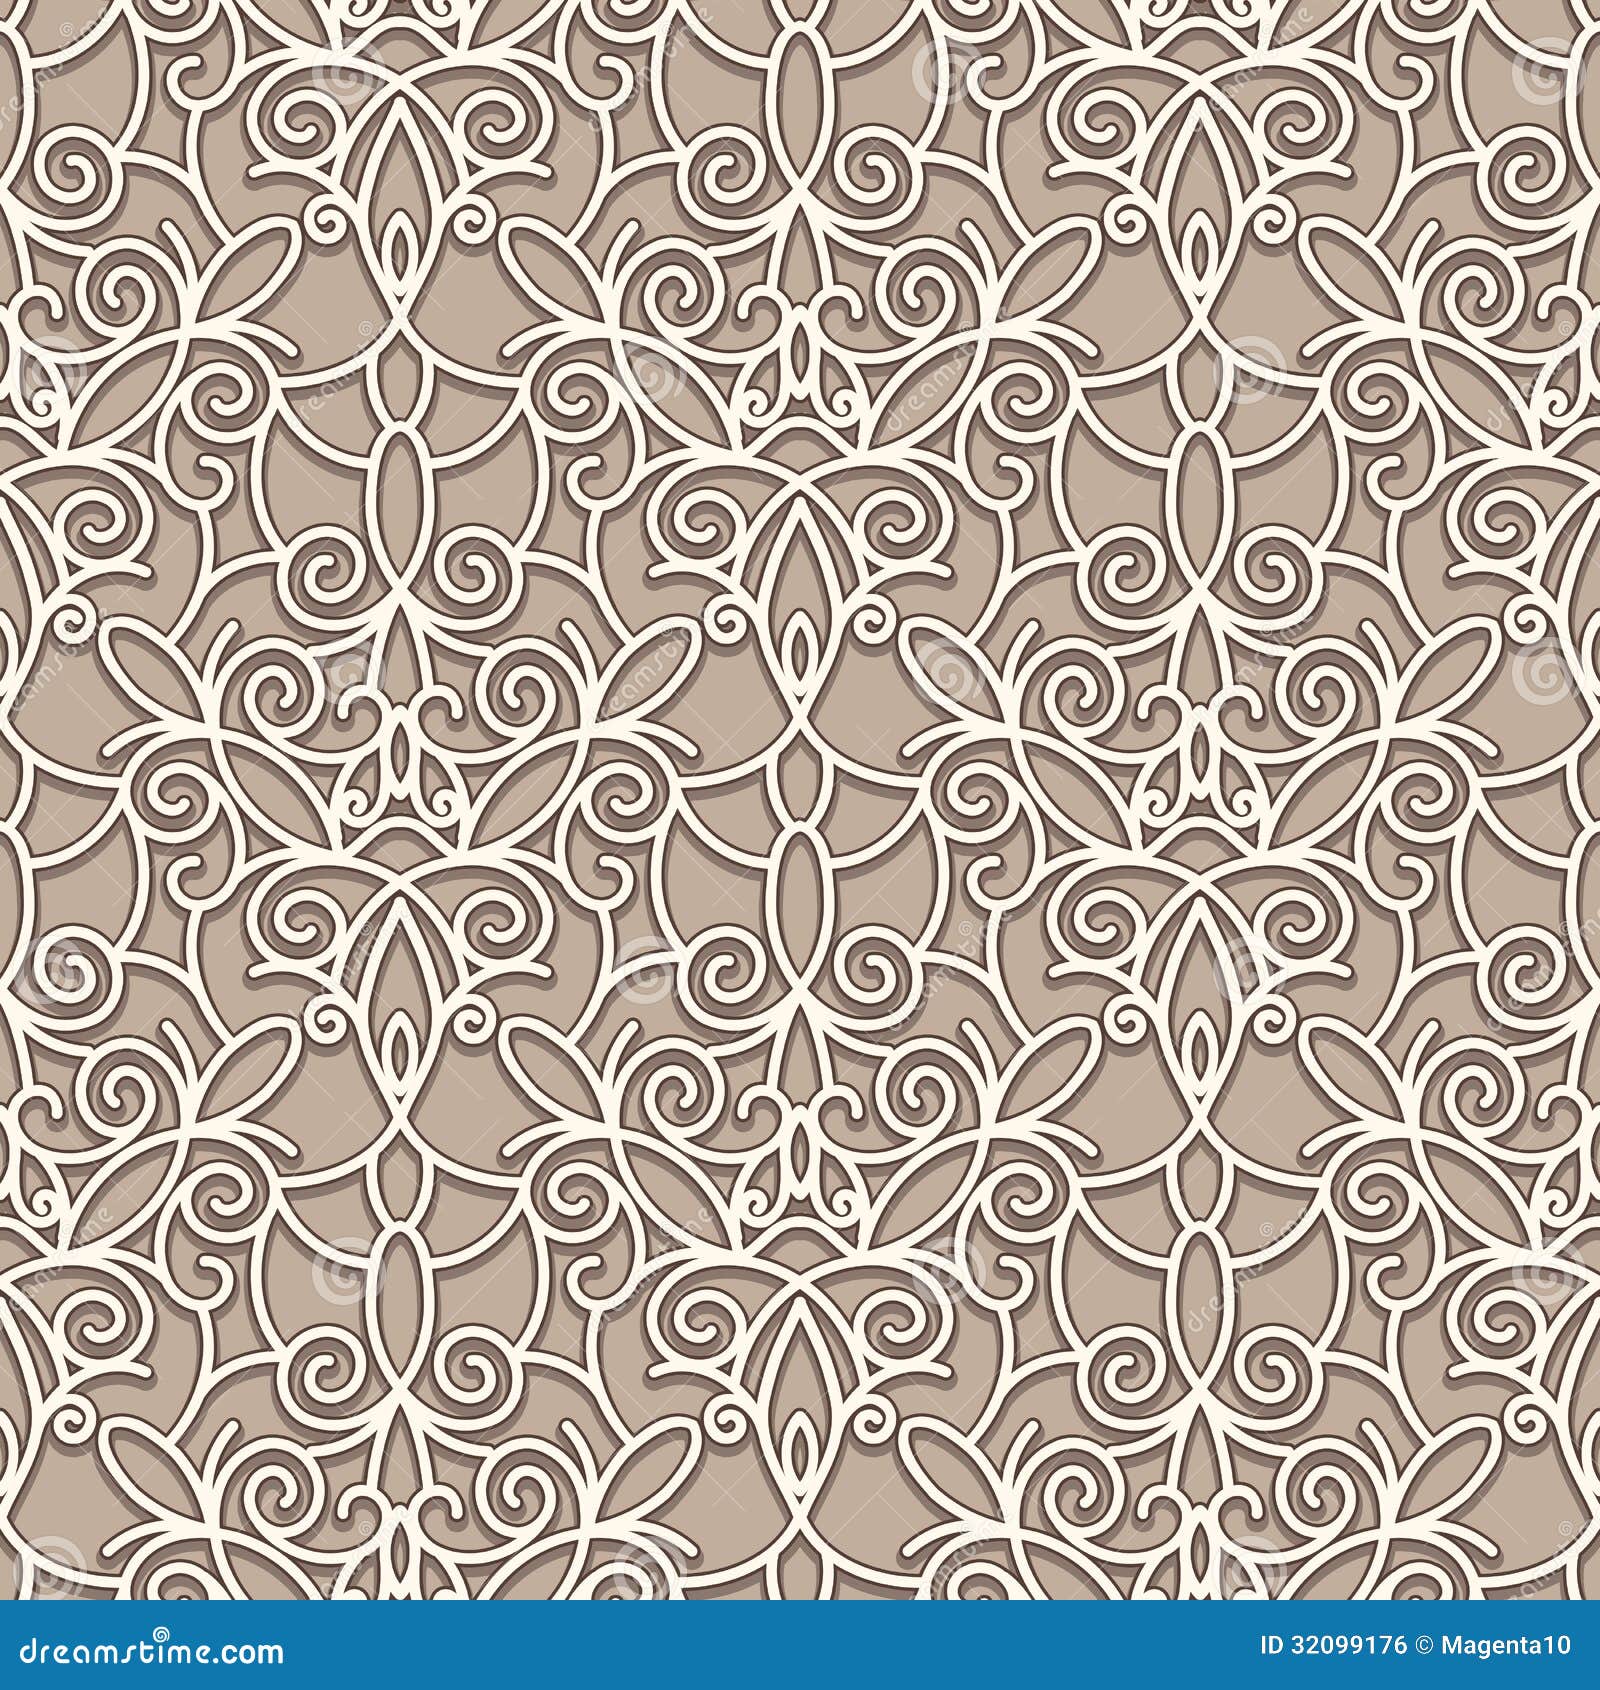 Old lace pattern. Abstract seamless beige lace pattern